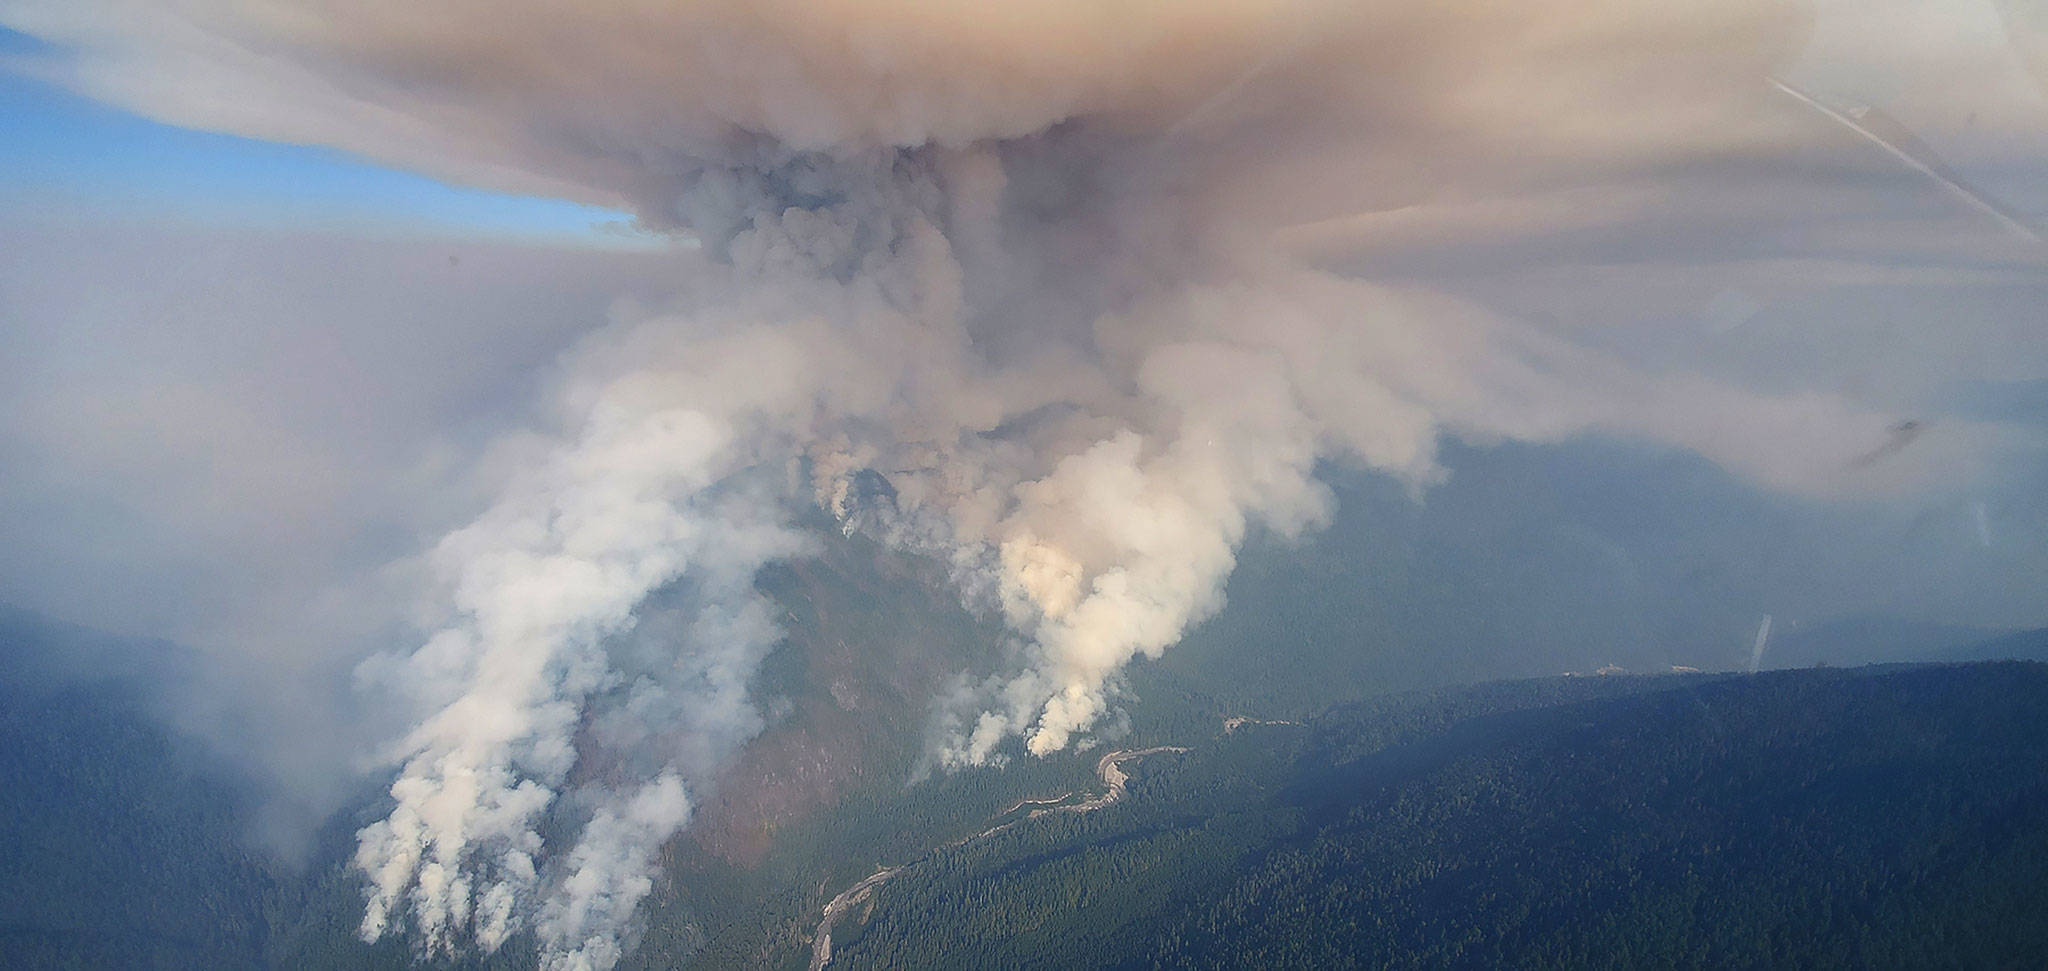 The Downey Creek Fire has grown to an estimated 1000 acres. (United States Department of Agriculture)